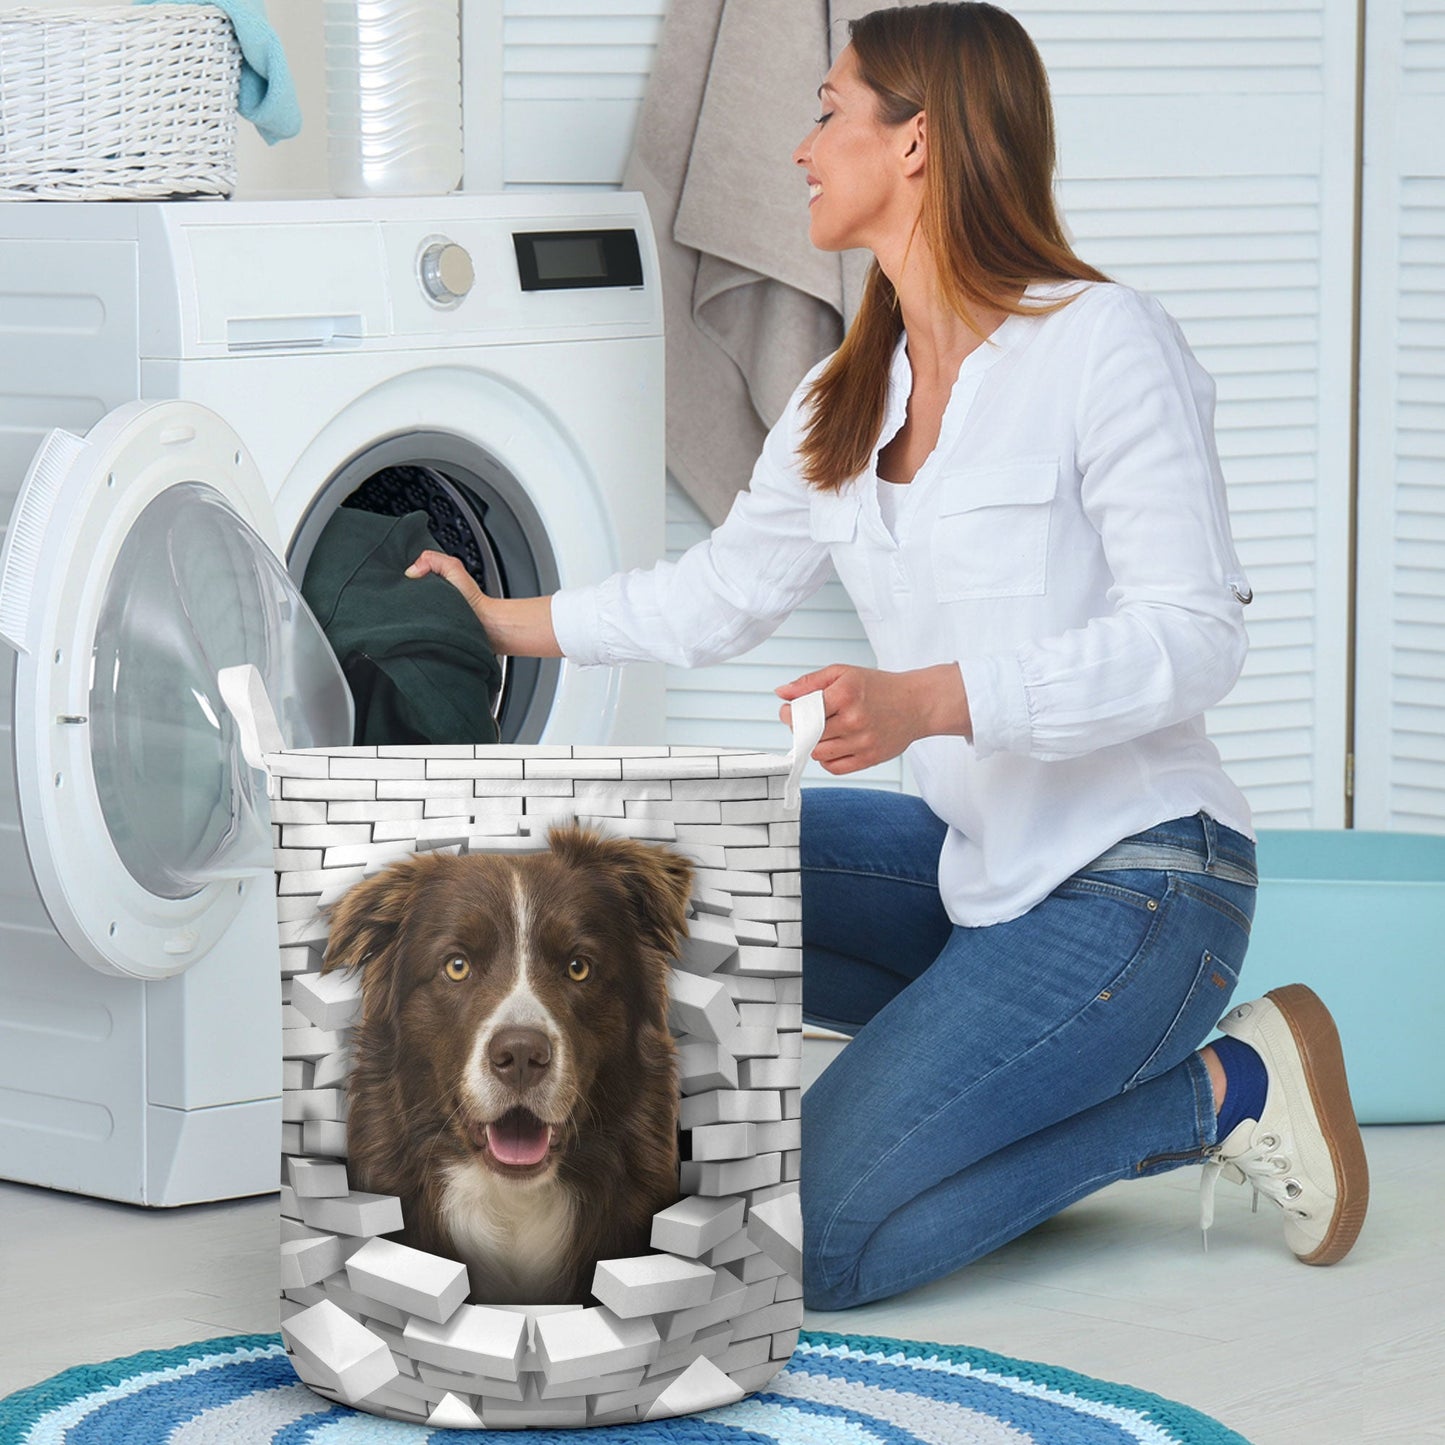 Border Collie 2 - In The Hole Of Wall Pattern Laundry Basket